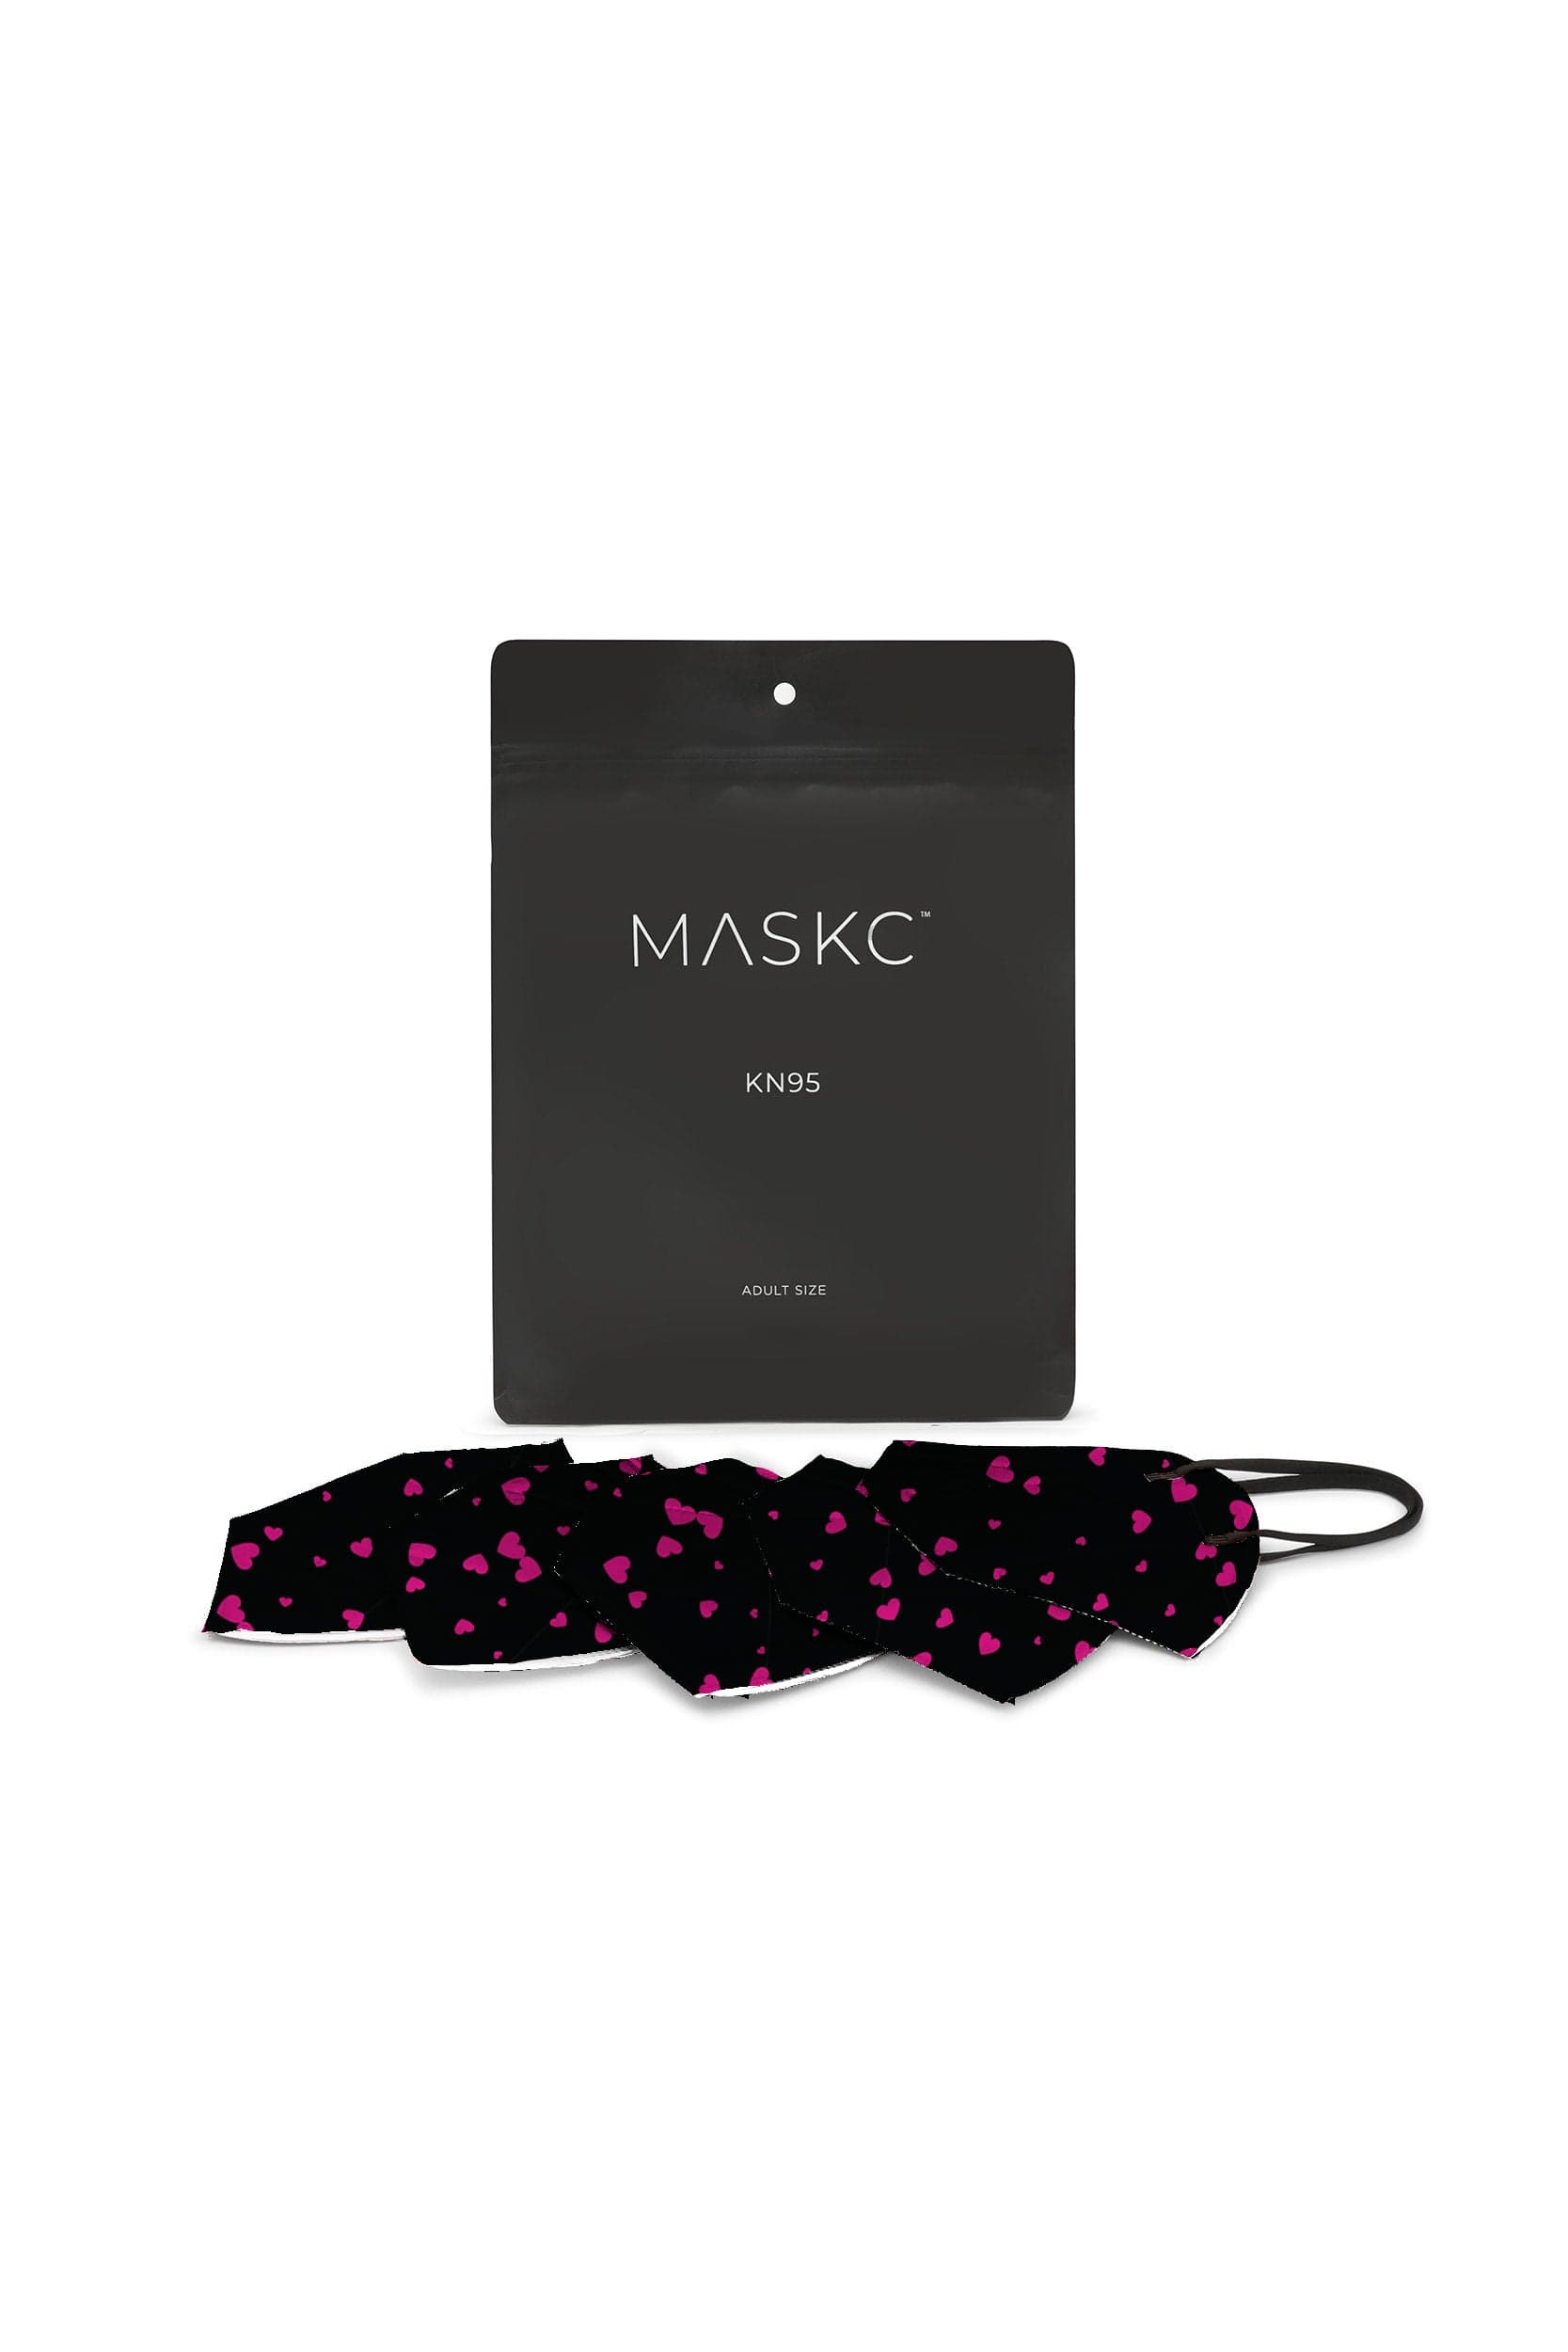 Pack of Black KN95 face masks with Pink Heart Print. Each pack contains stylish high quality face masks. 